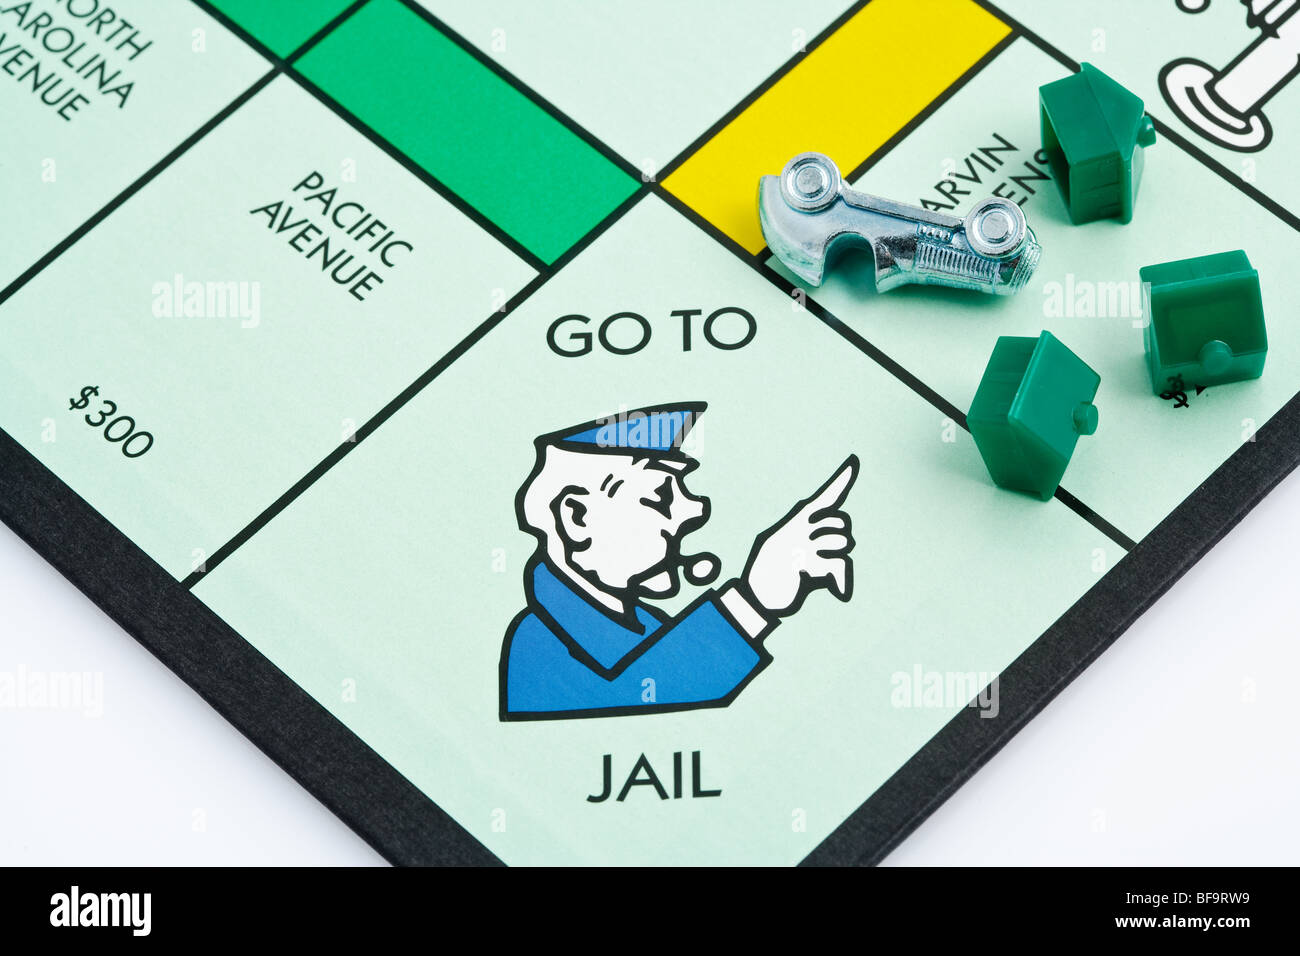 Monopoly Board Game Stock Photo